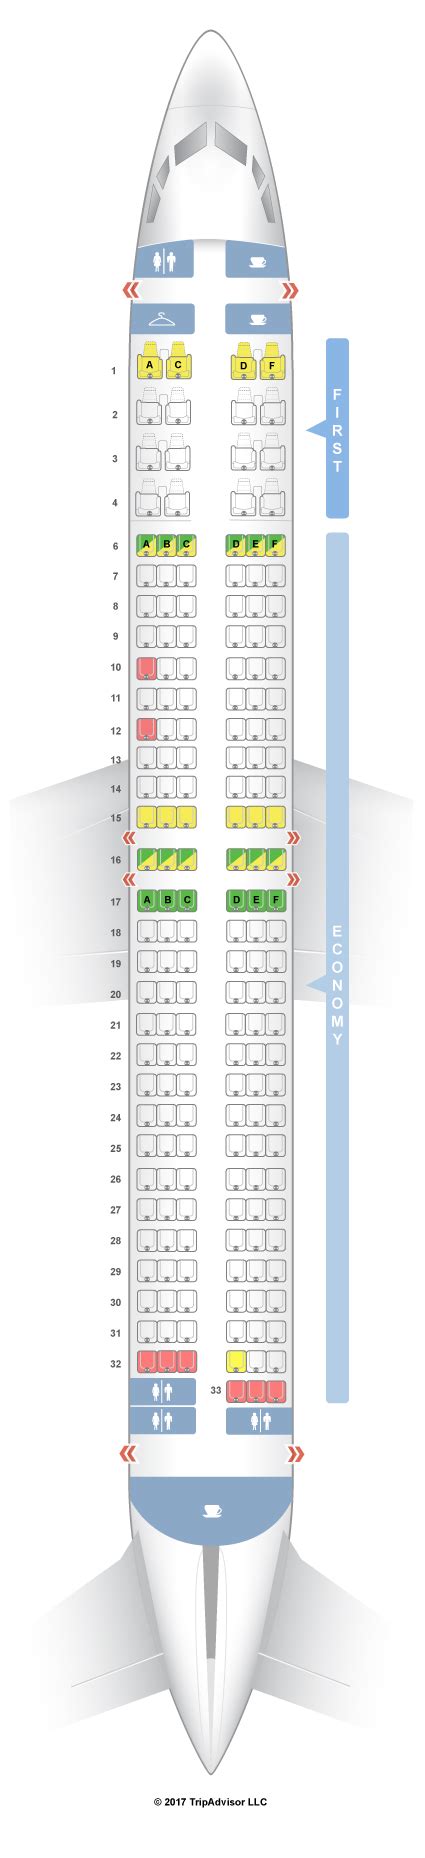 Alaska 737 900 seat map. Find the best seat wiht our Alaska Airlines Boeing 737-800 (738) seating chart. Use this seat map to get the most comfortable seats, legroom and recline before booking. ... Boeing 737-900 (739) 178 seats. Boeing 737-900ER (739) … 